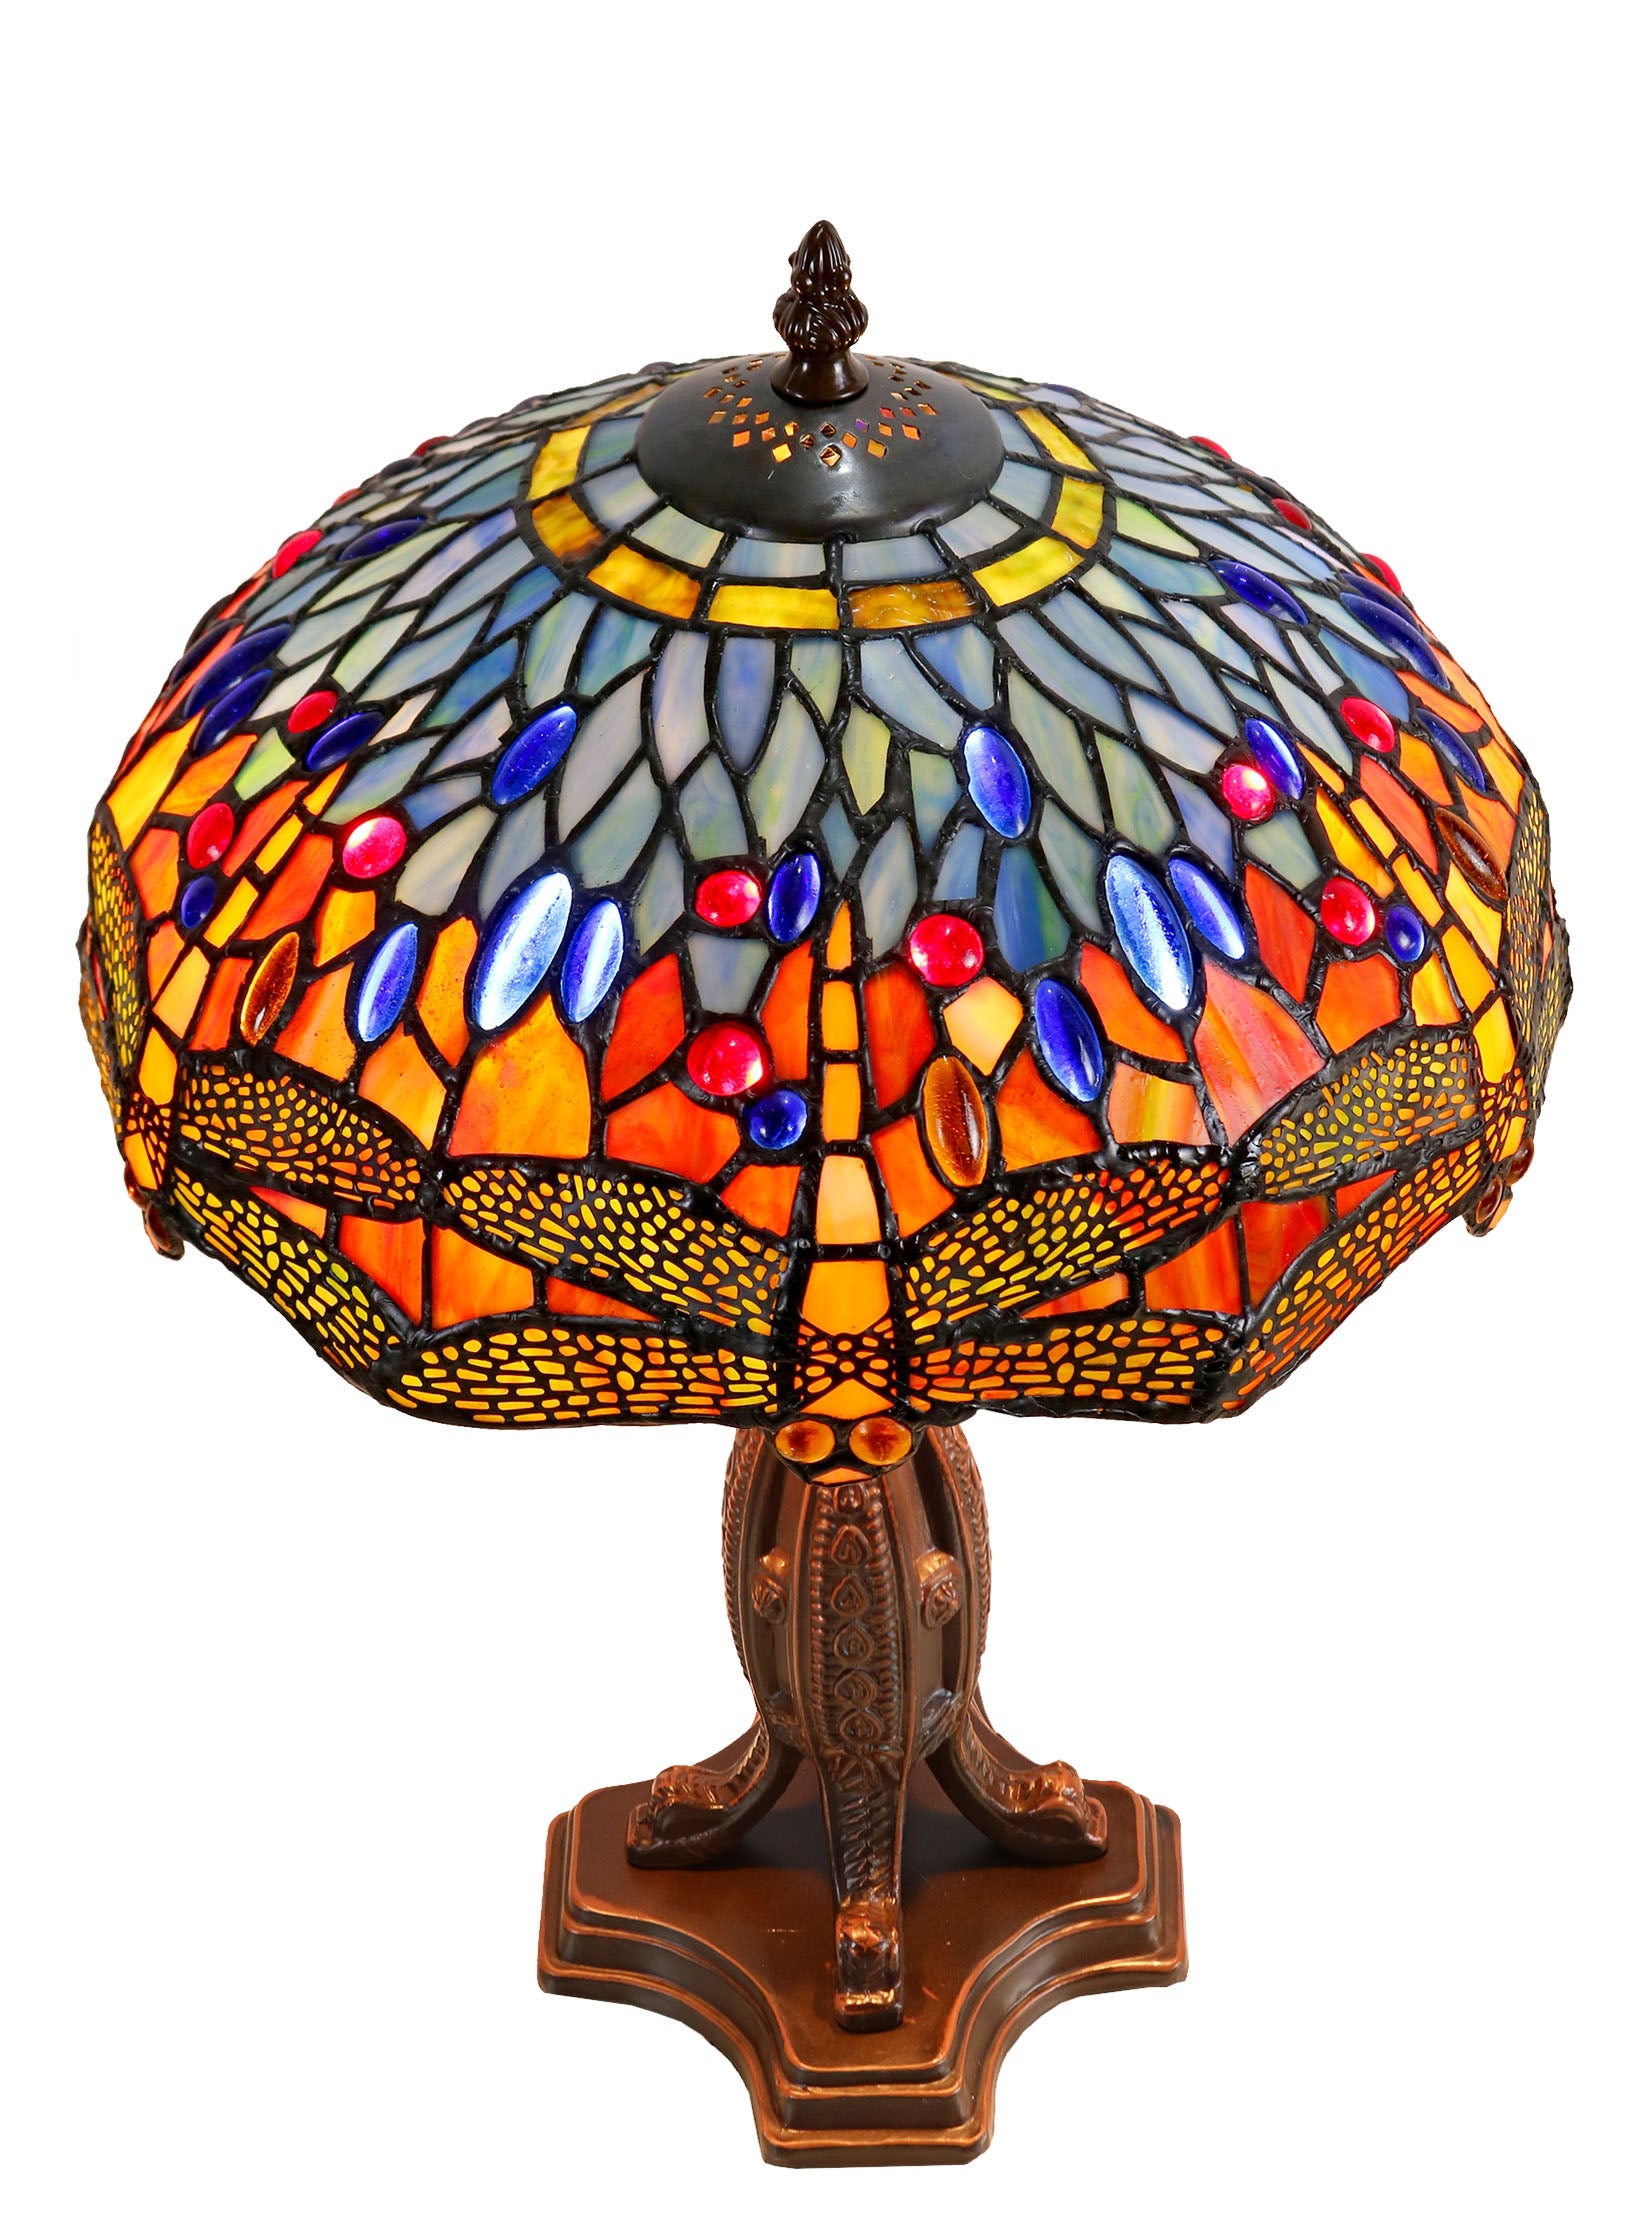 12" Red Dragonfly Style Tiffany Bedside Lamp With Antique Style Metal Base